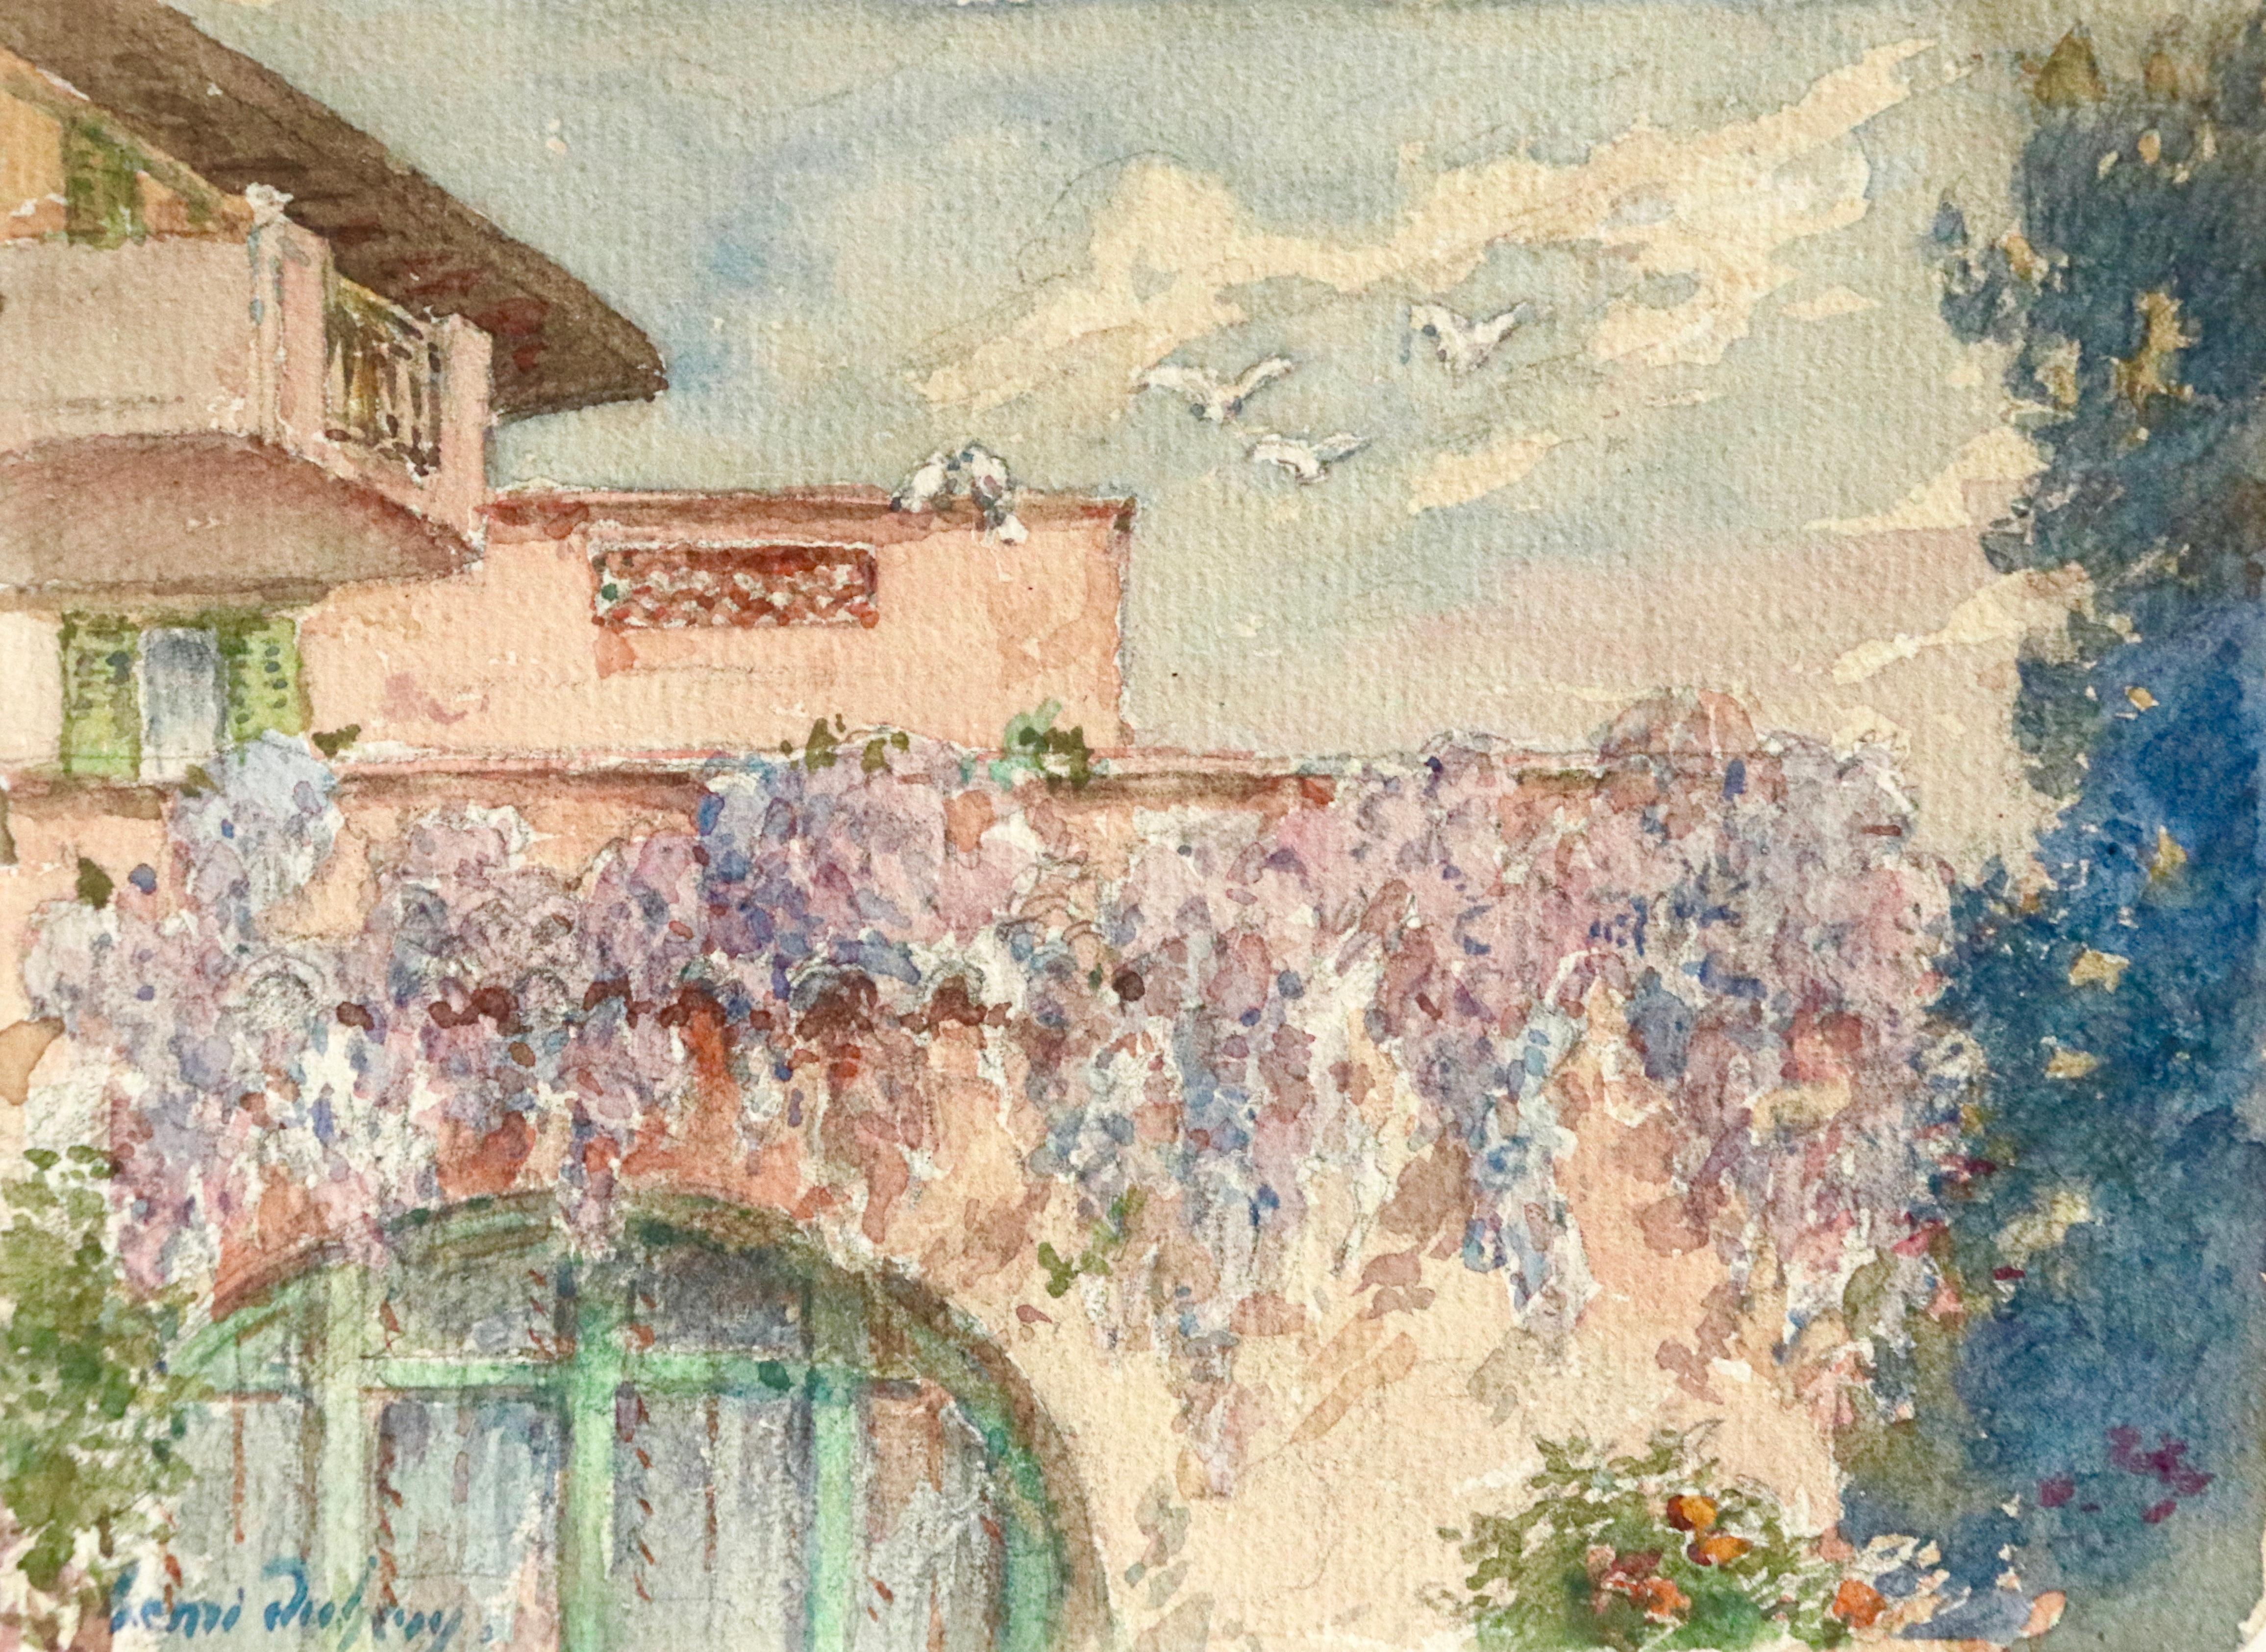 Watercolour on paper circa 1925 by Henri Duhem, of purple wisteria hanging from a cottage wall on a summer's day in Juan les Pins as birds fly overhead. Signed lower left. This painting is not currently framed but a suitable frame can be sourced if